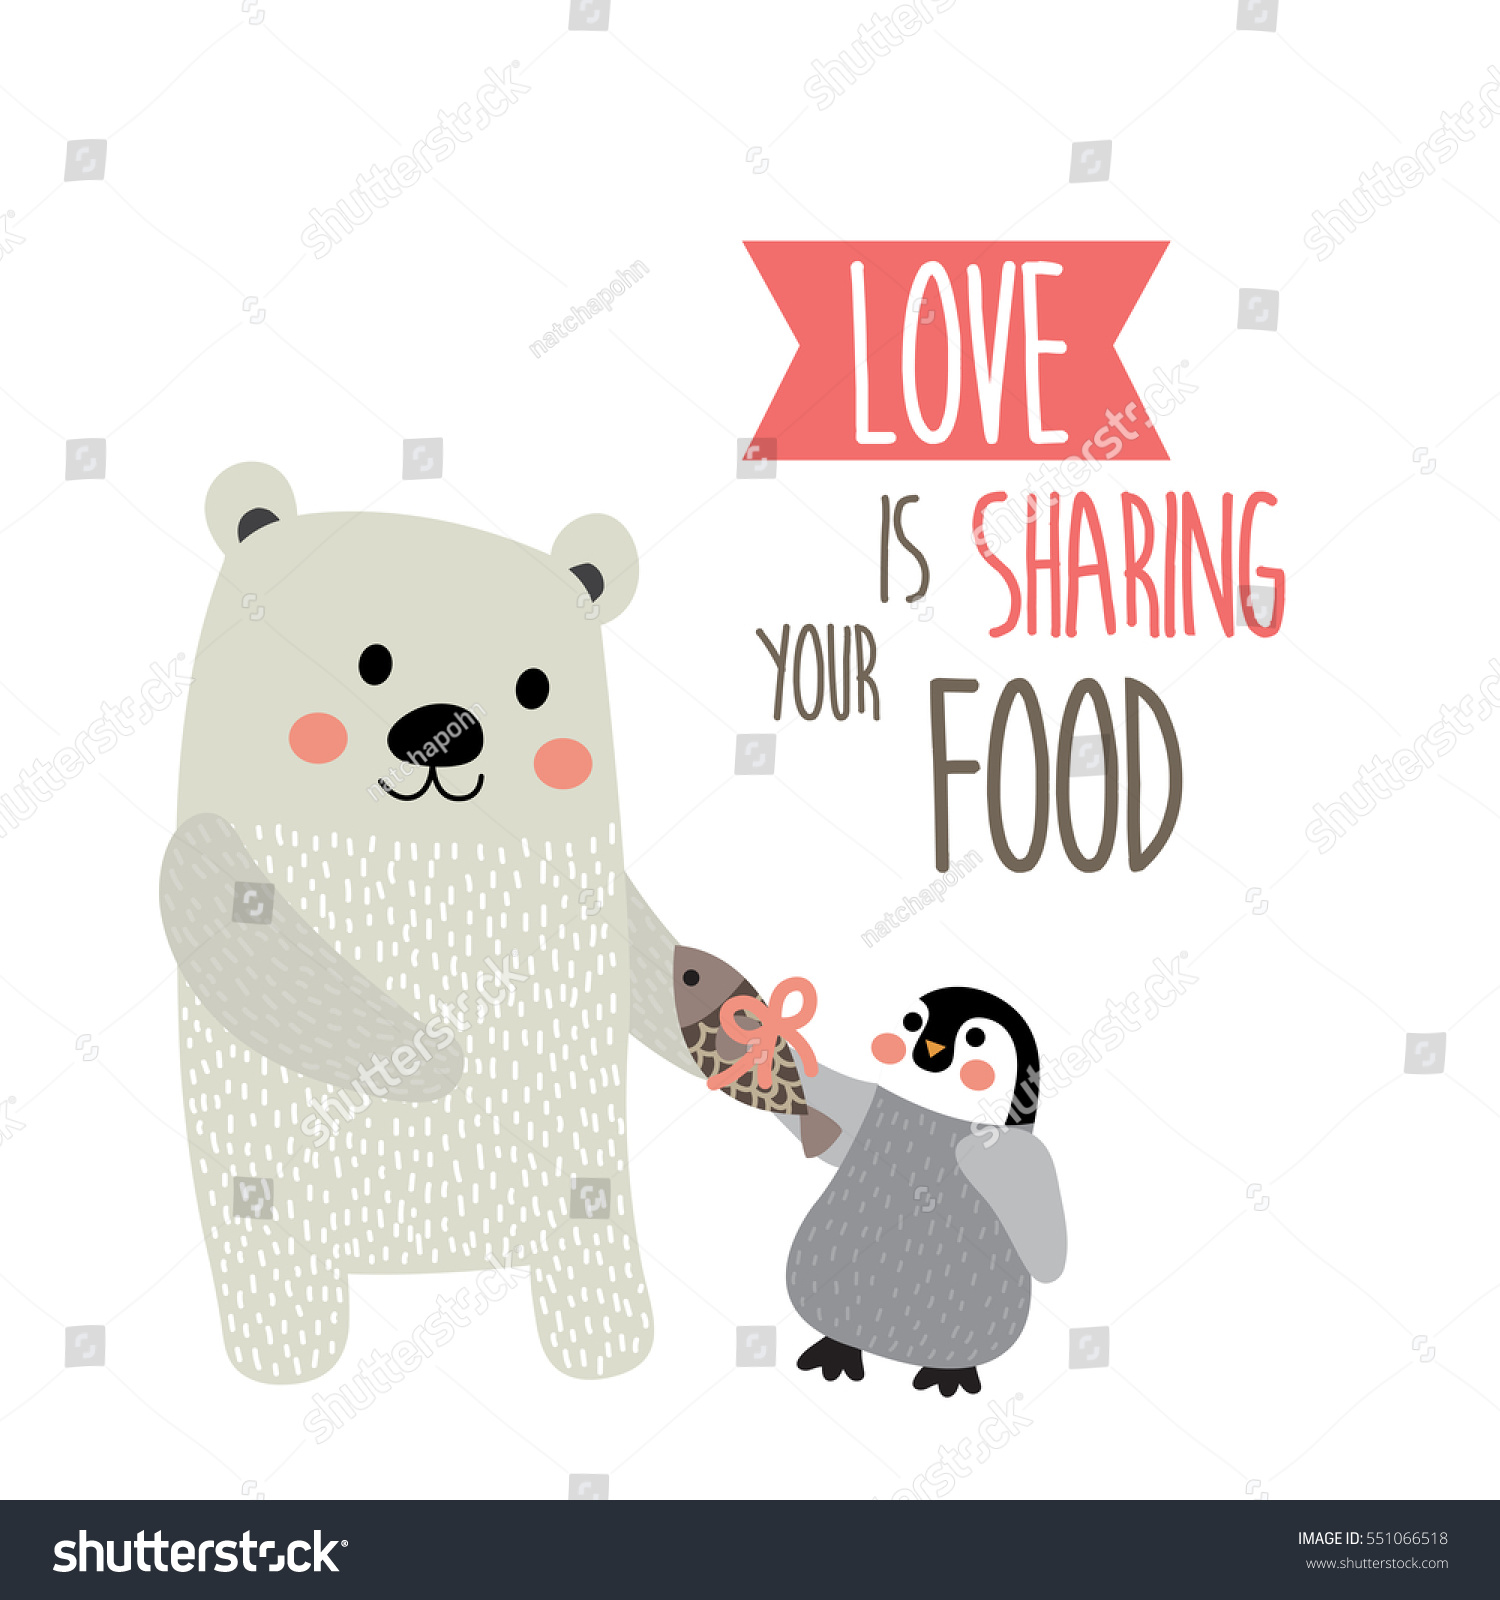 Love is Sharing your food quote with cute Polar bear and Penguin sharing fish